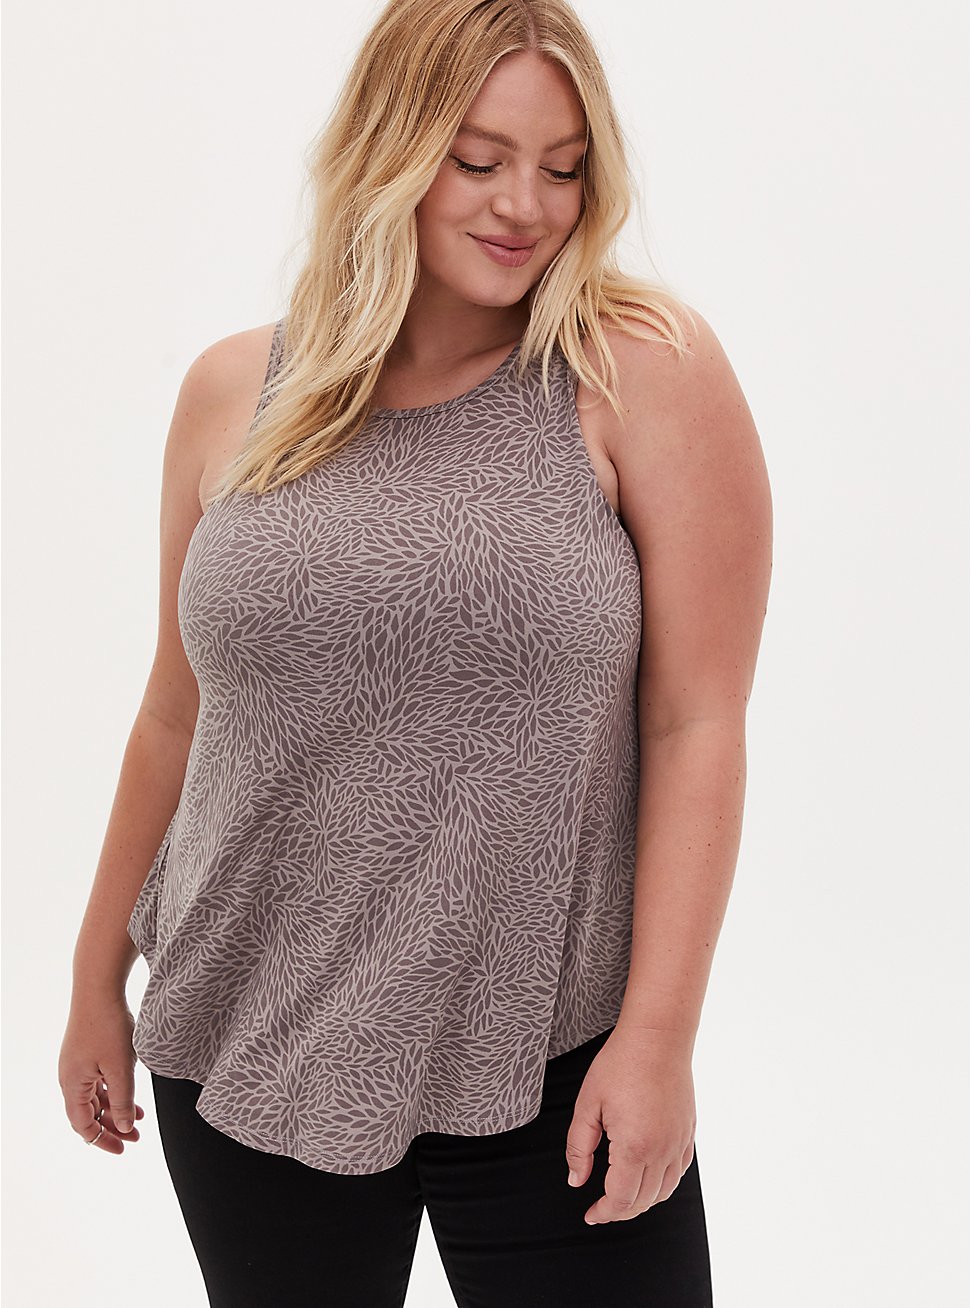 Plus Size - Pebble Grey Abstract Floral Studio Knit High Neck Tank - Torrid